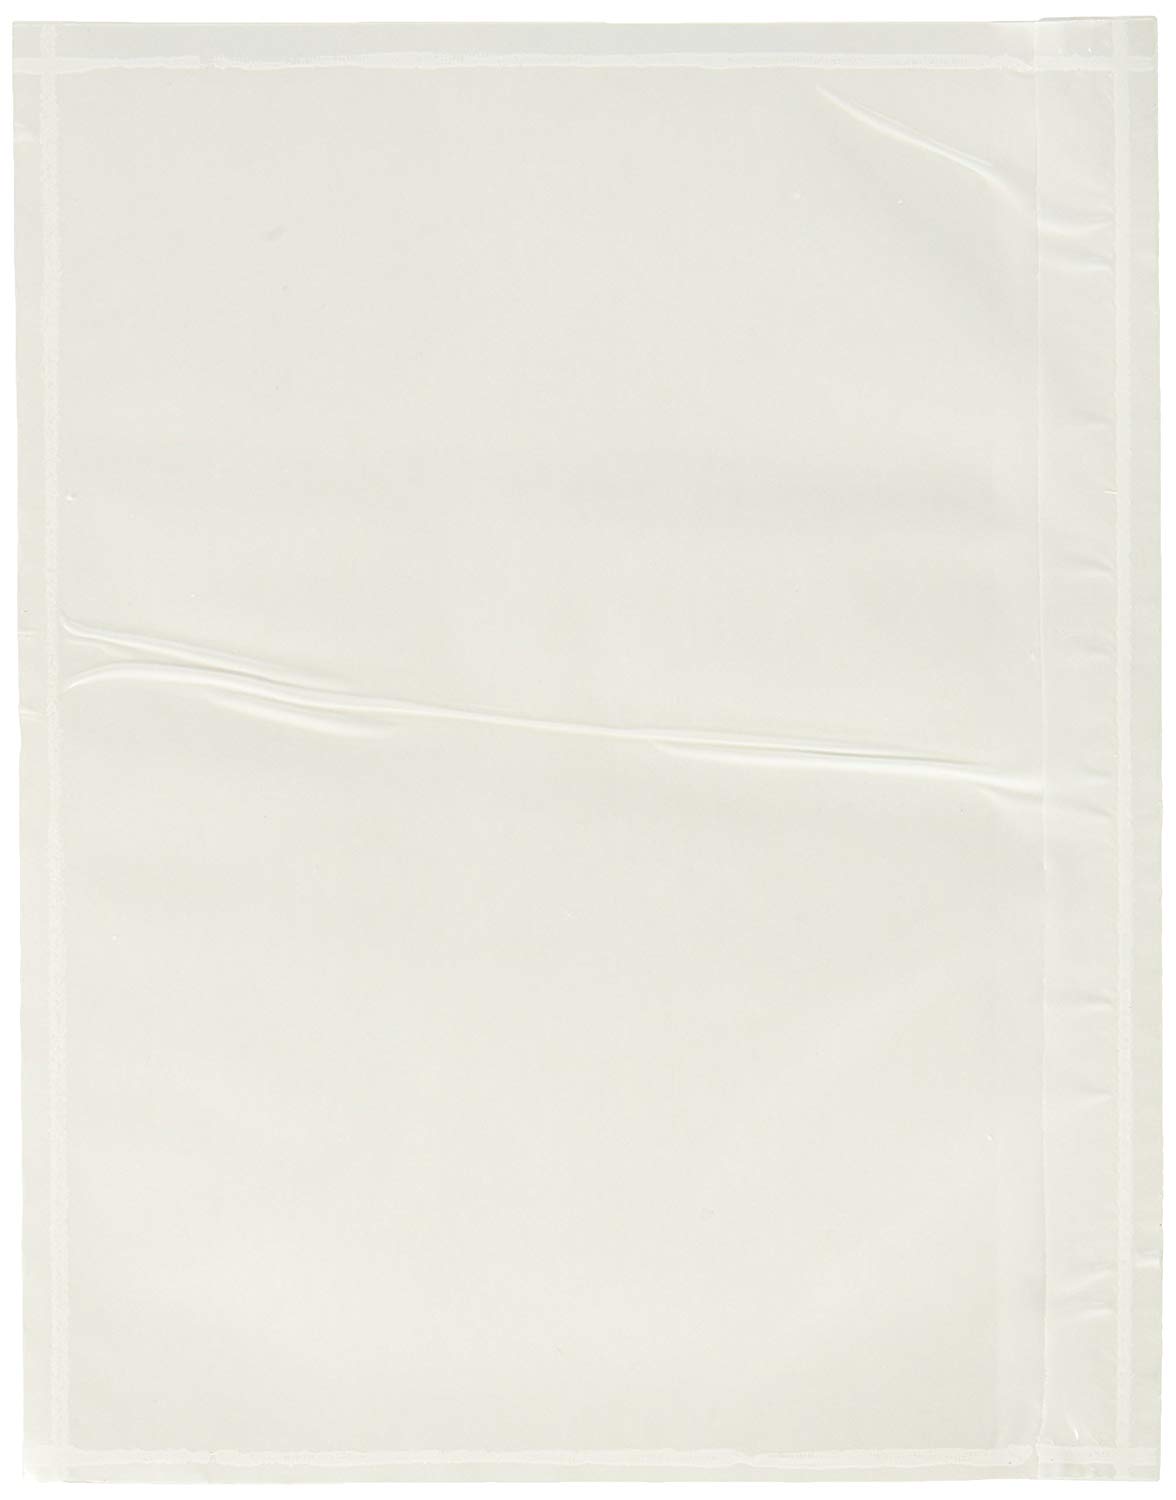 LPS Pres-Quick Unprinted Packing List Envelope - 7in x 5.5in